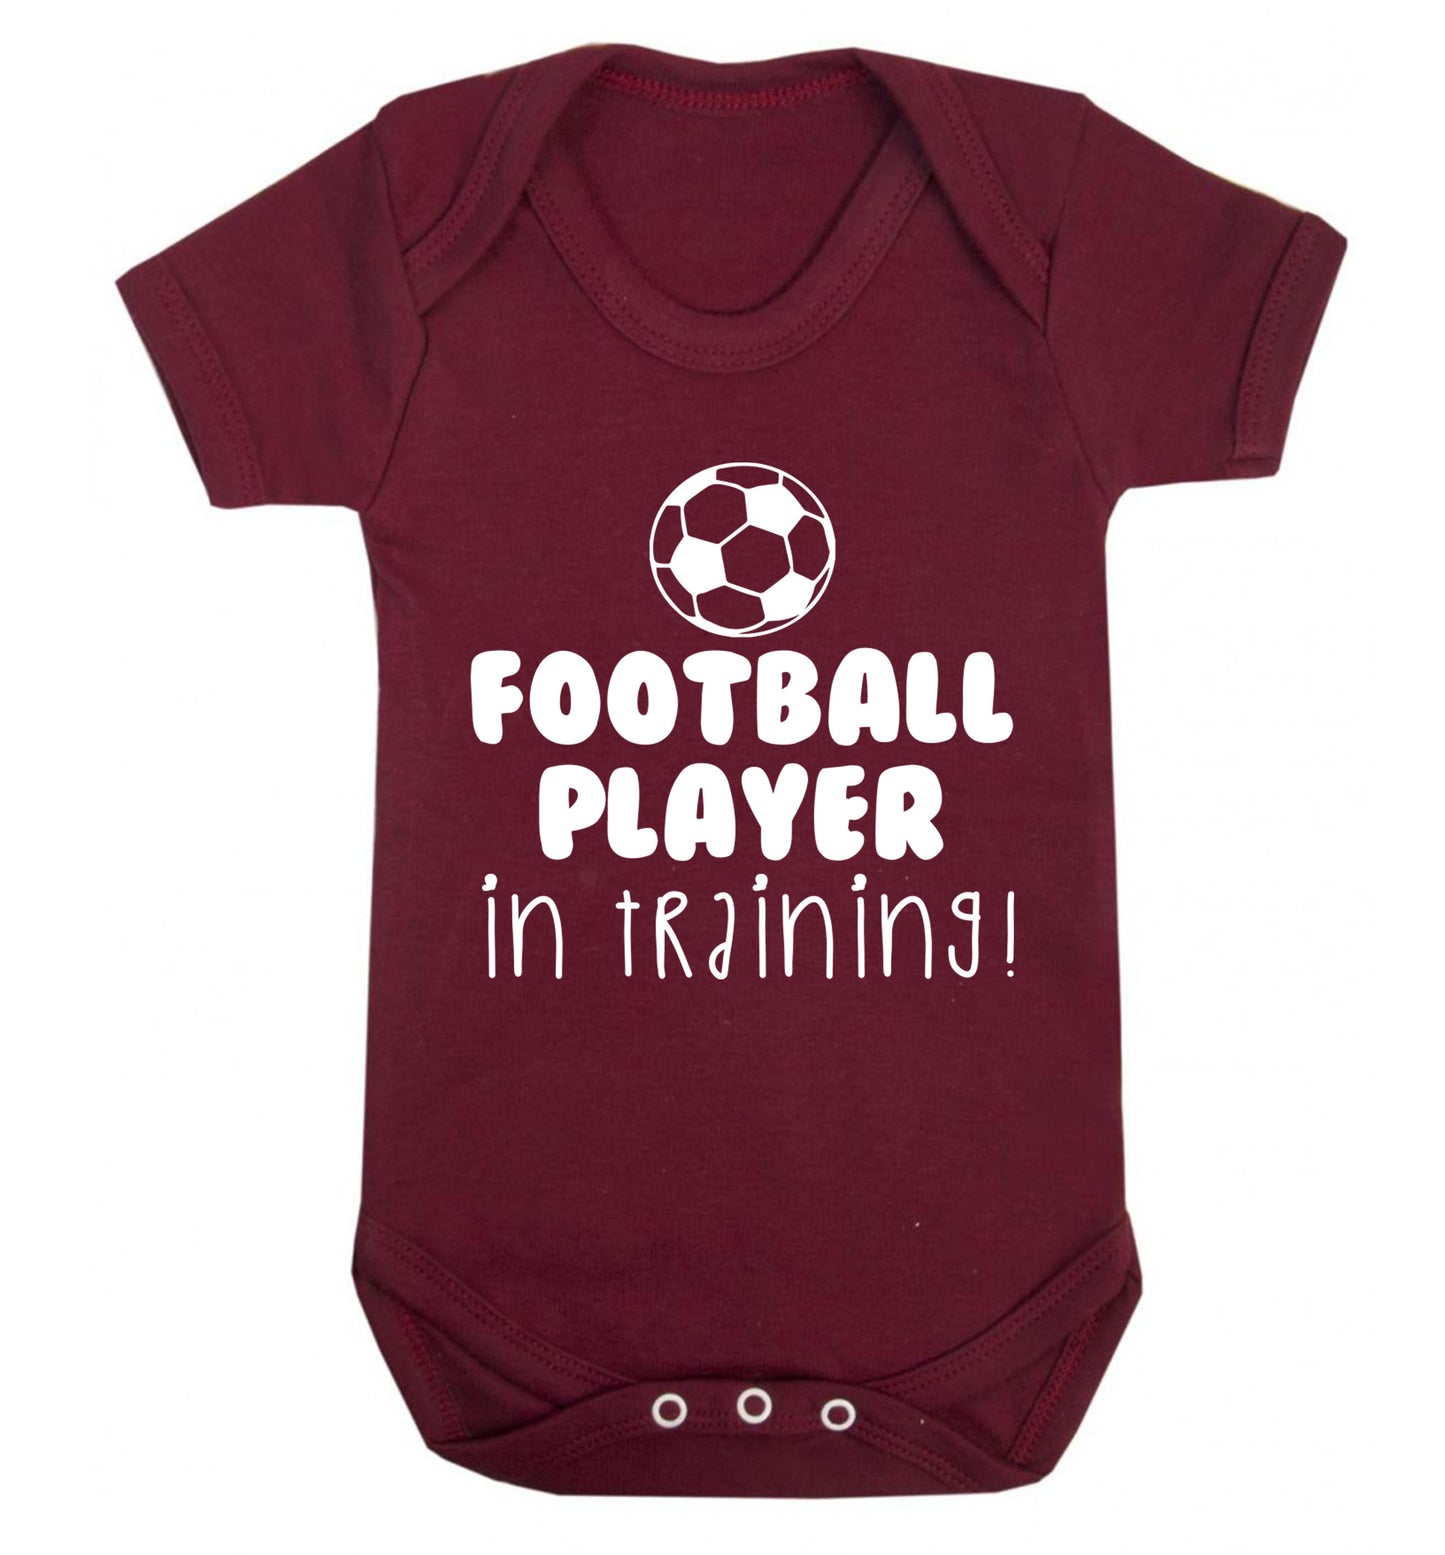 Football player in training Baby Vest maroon 18-24 months